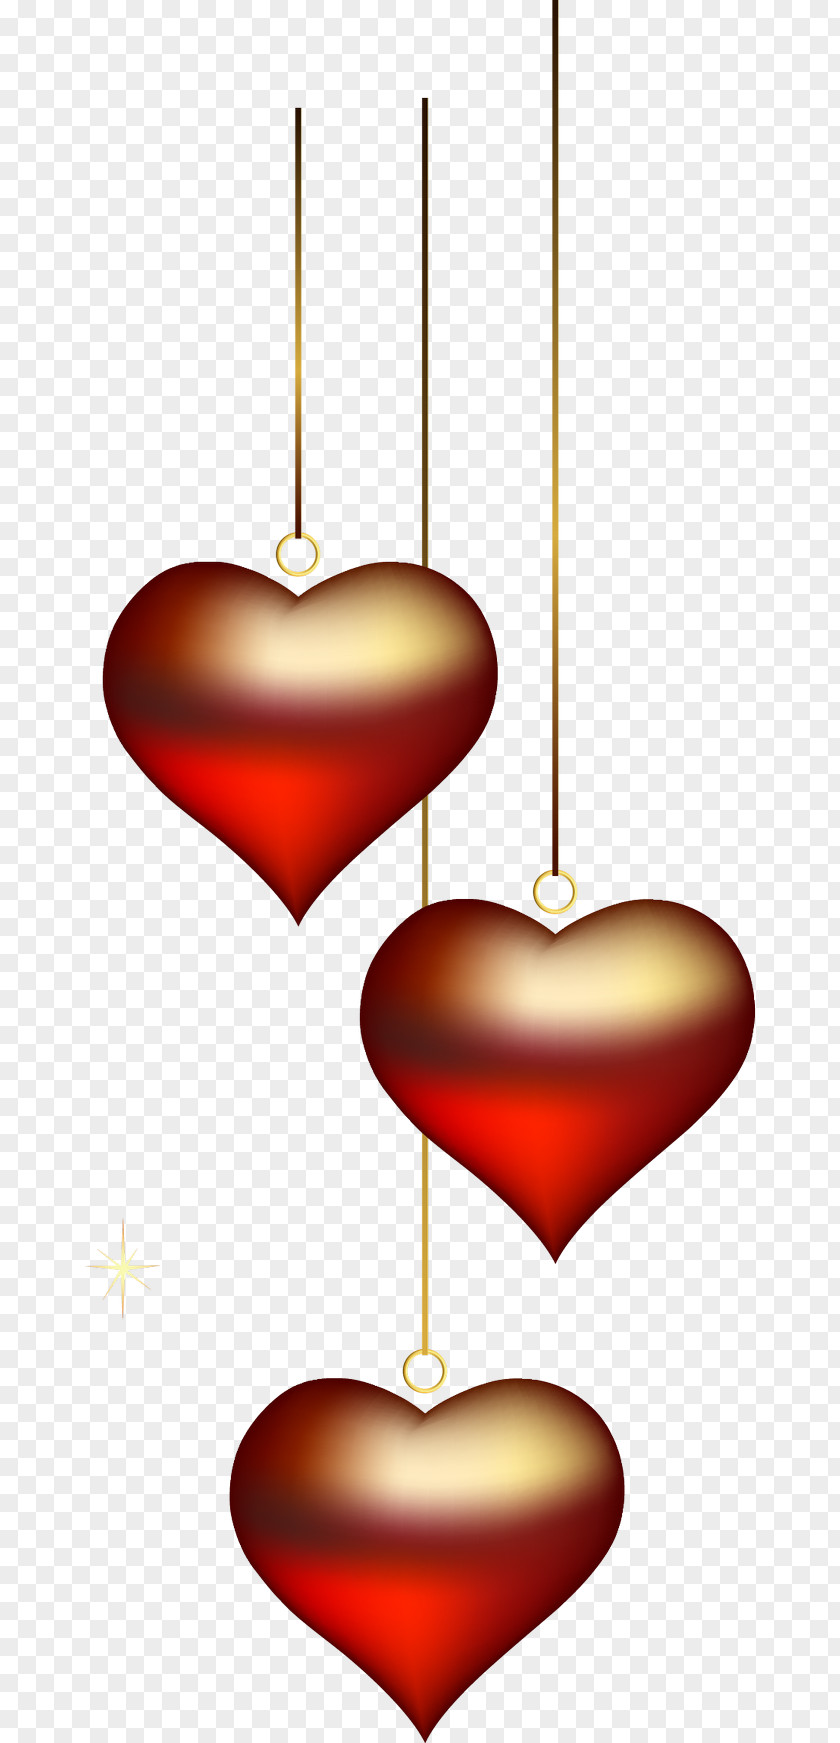 Happy Valentines Day Weddings In India Clip Art PNG